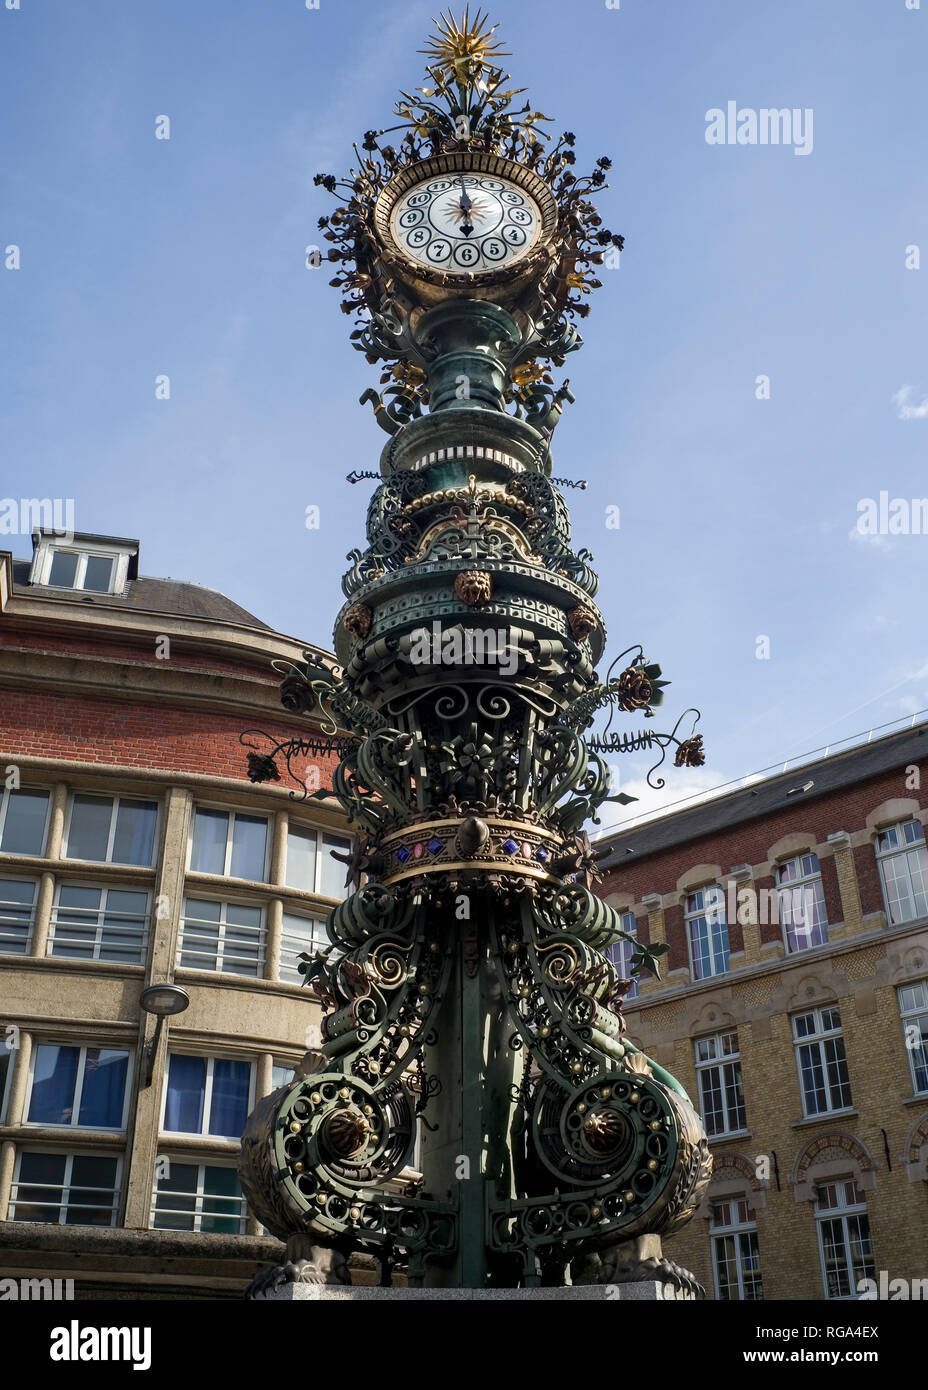 Dewailly clock in Amiens, France Stock Photo